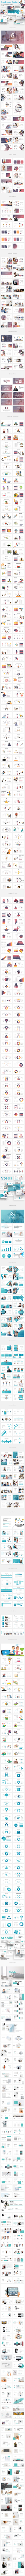 Business Data 3 in 1 Pitch Deck Bundle Powerpoint Template